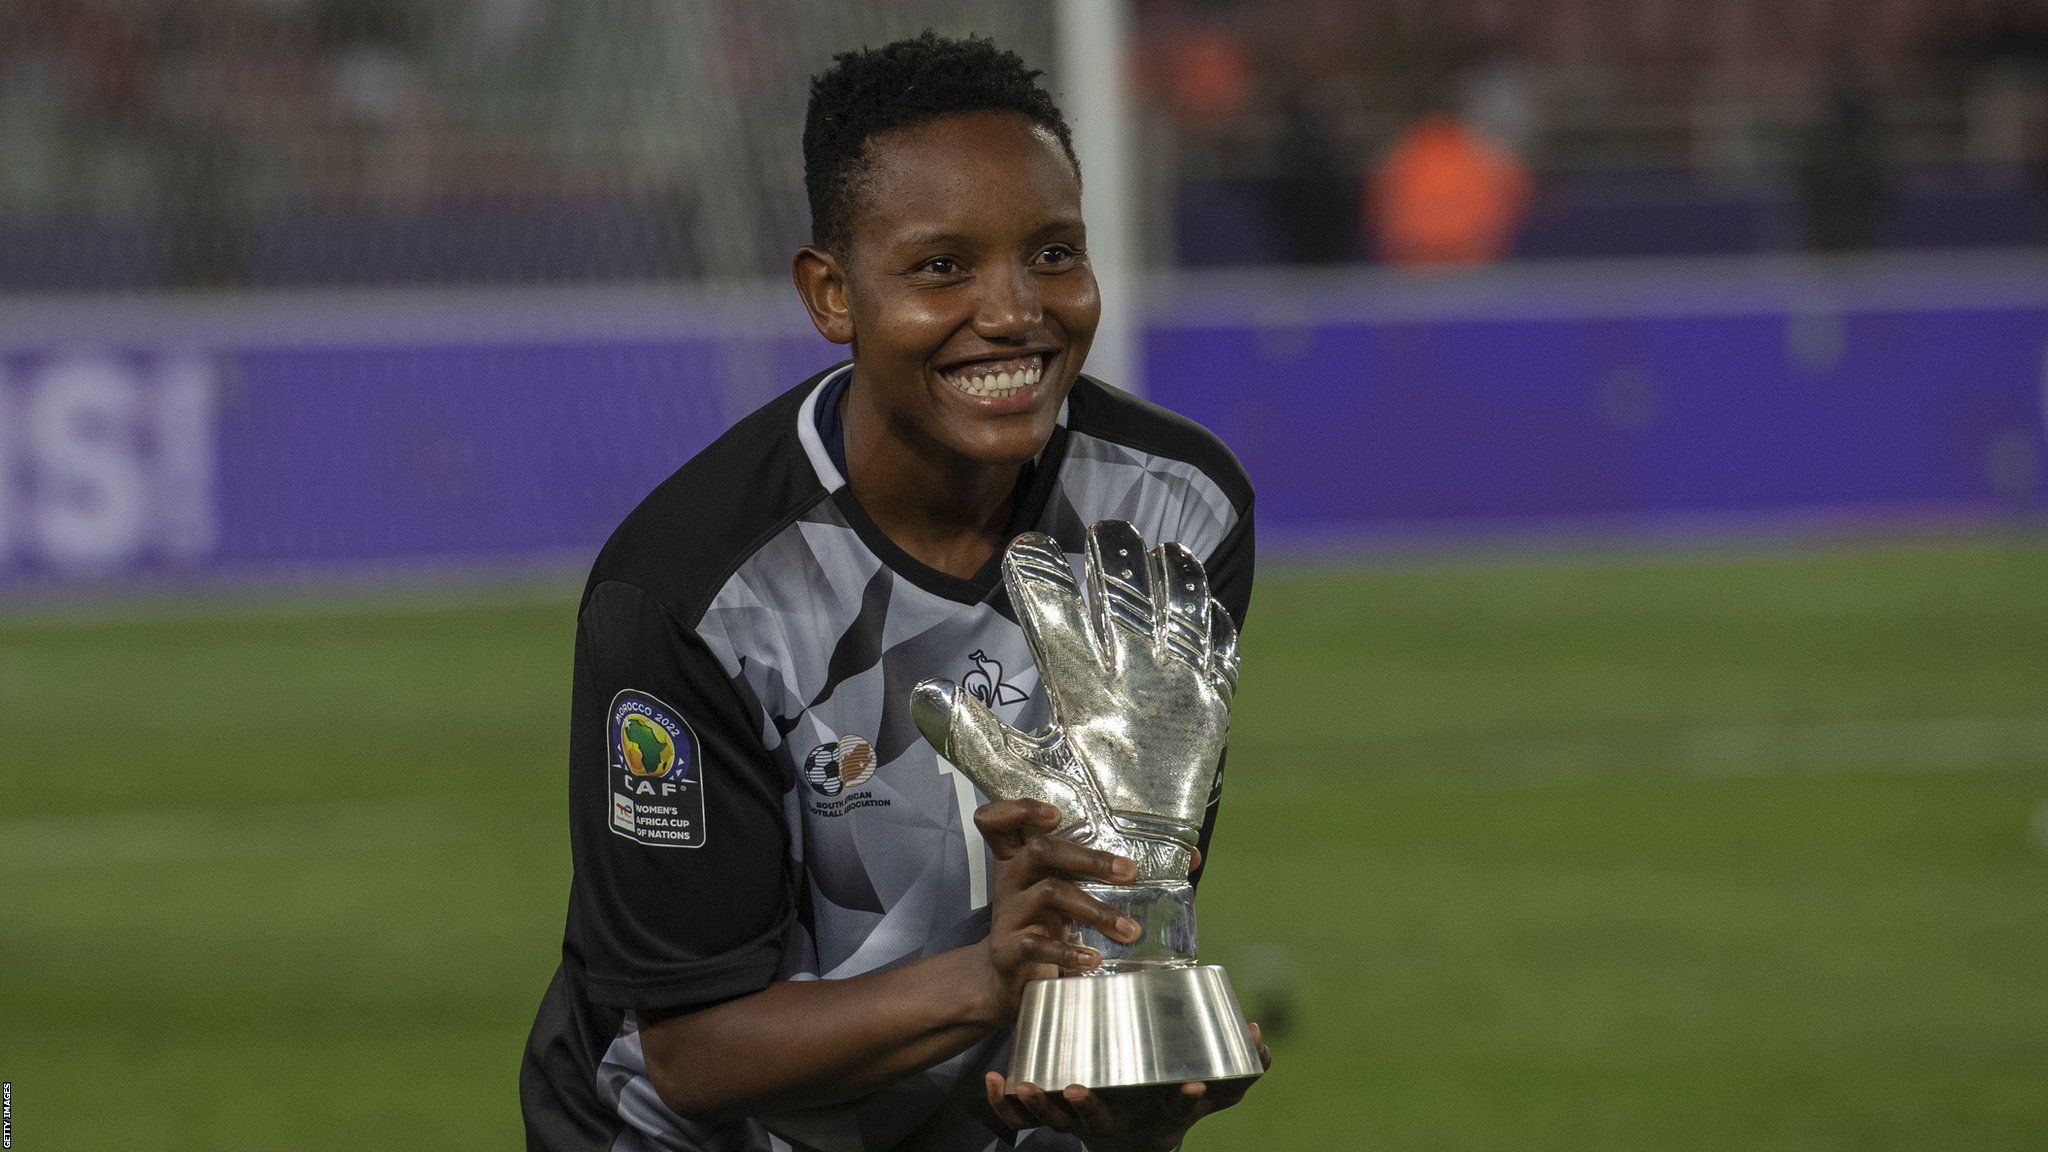 South Africa goalkeeper Andile Dlamini holds the trophy after winning the Africa Women's Cup of Nations 2022